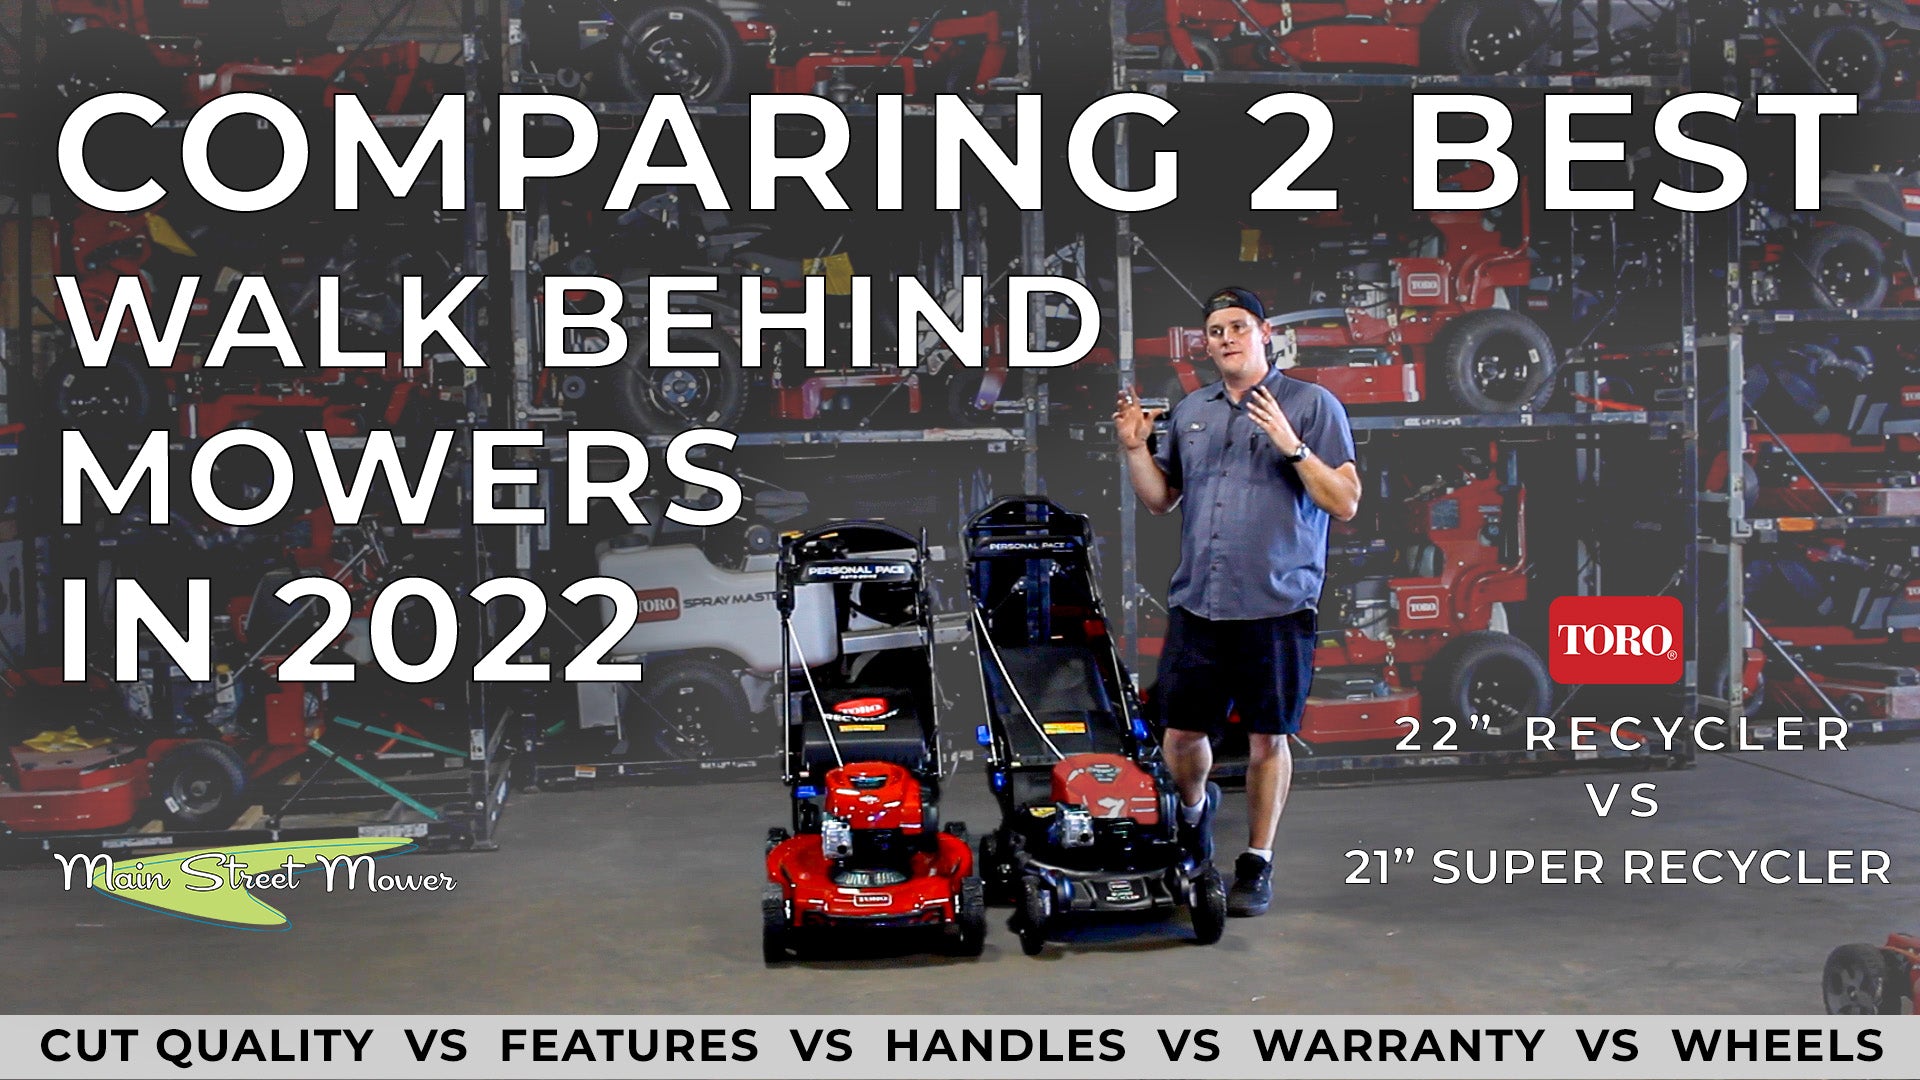 Comparing the 2 Best Walk Behind Mowers Ever! TORO Recycler vs Super Recycler